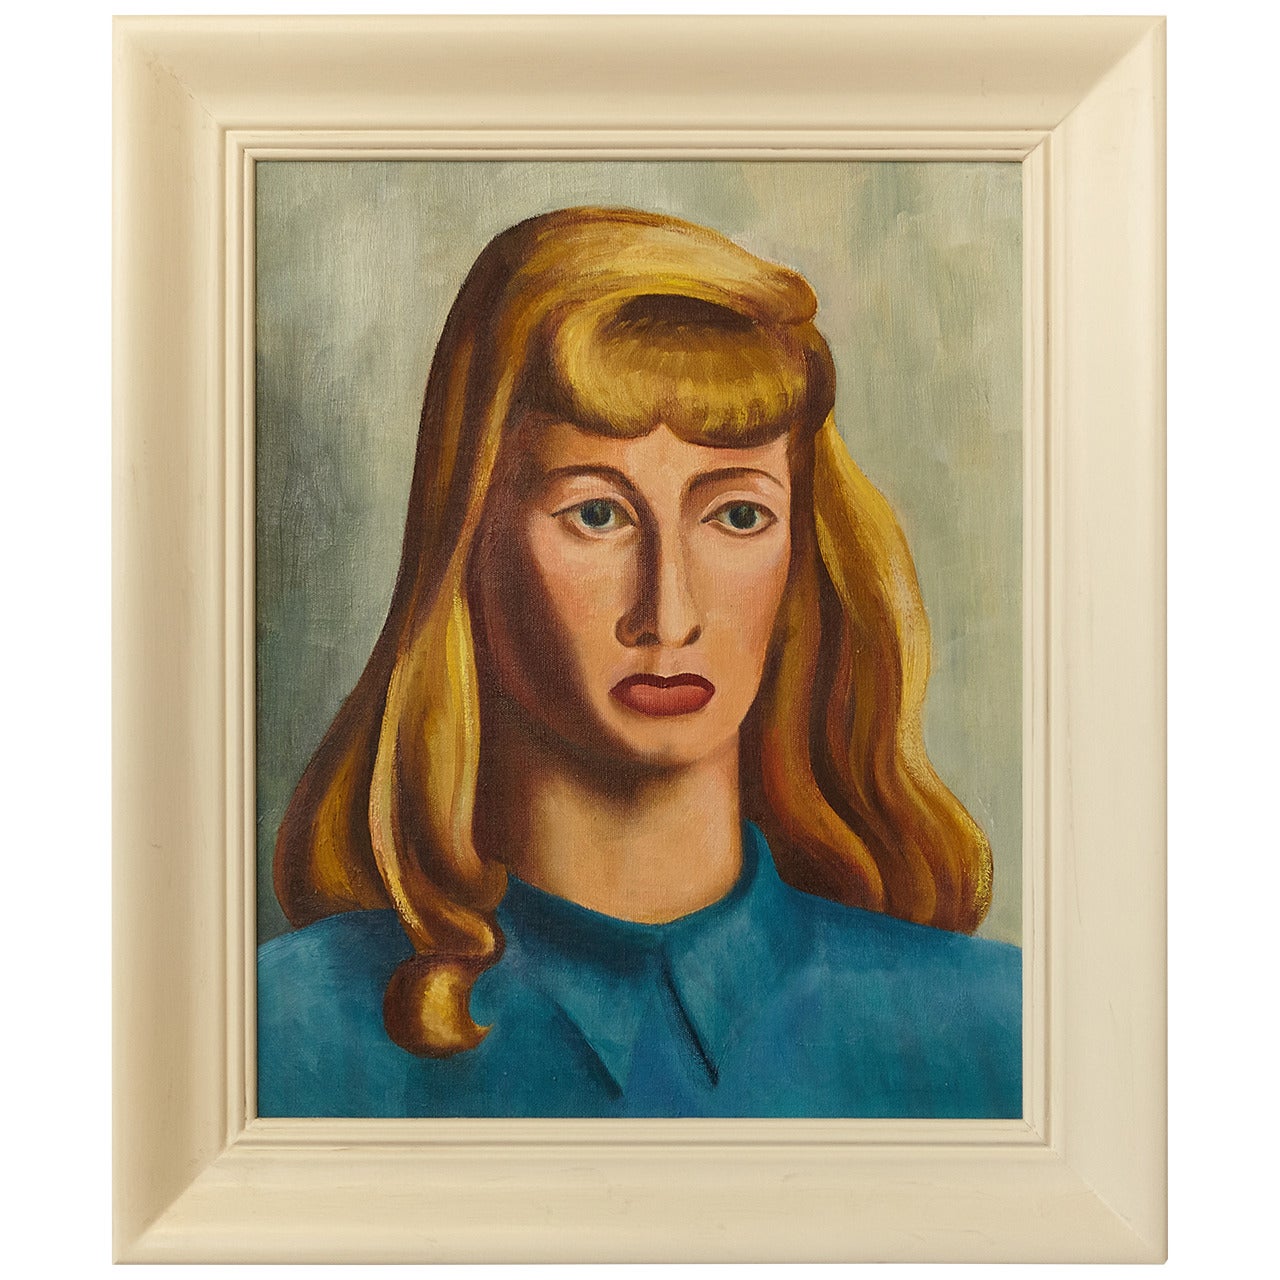 1948 Oil on Canvas by Raymond J. Wendell Titled, "My Girl Friend" For Sale